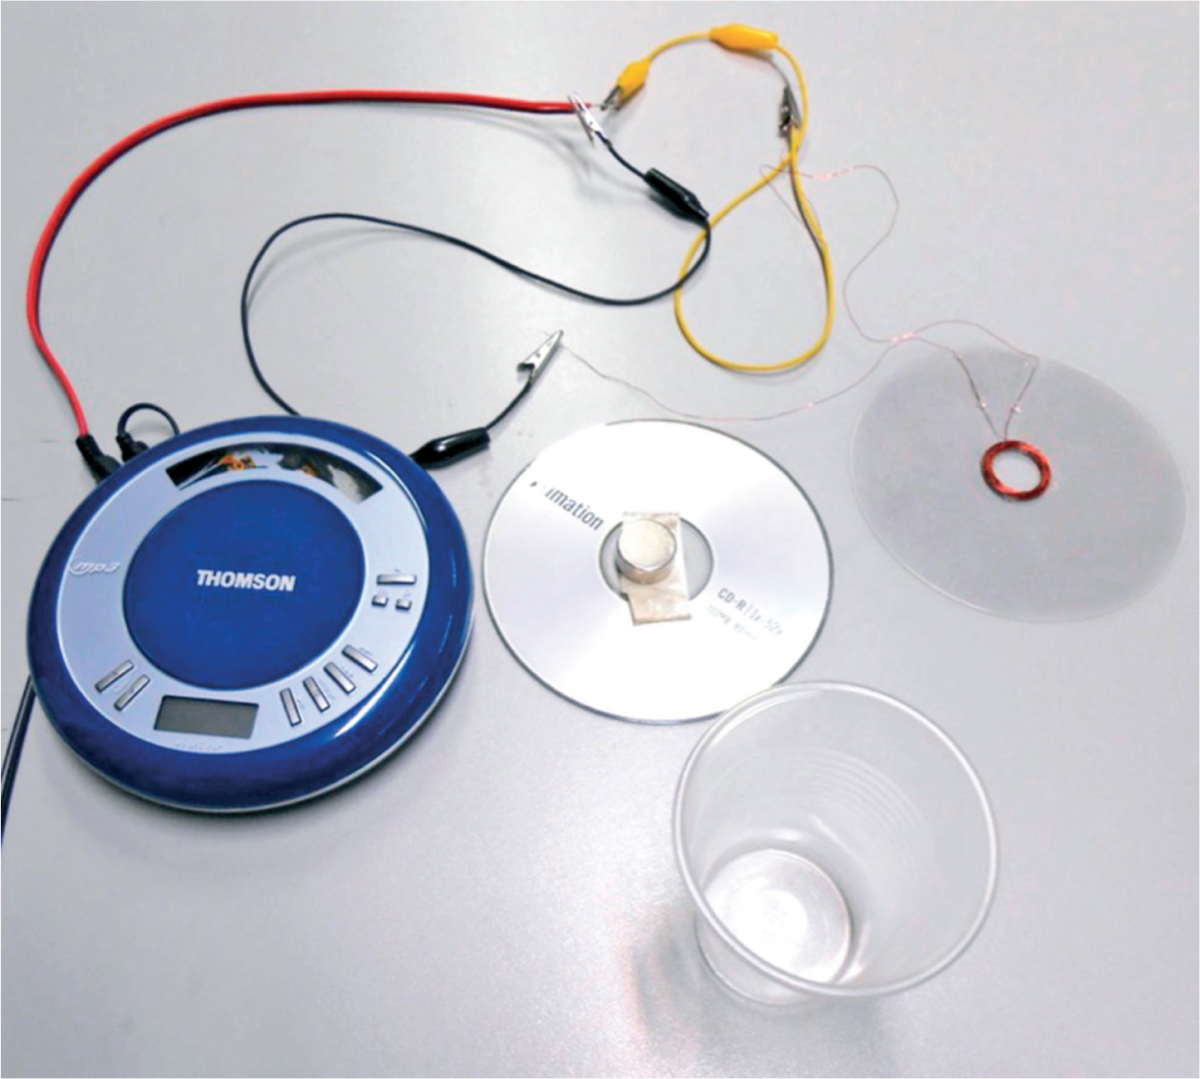 Figure 5: The components of the loudspeaker, using an mp3 player for the audio source